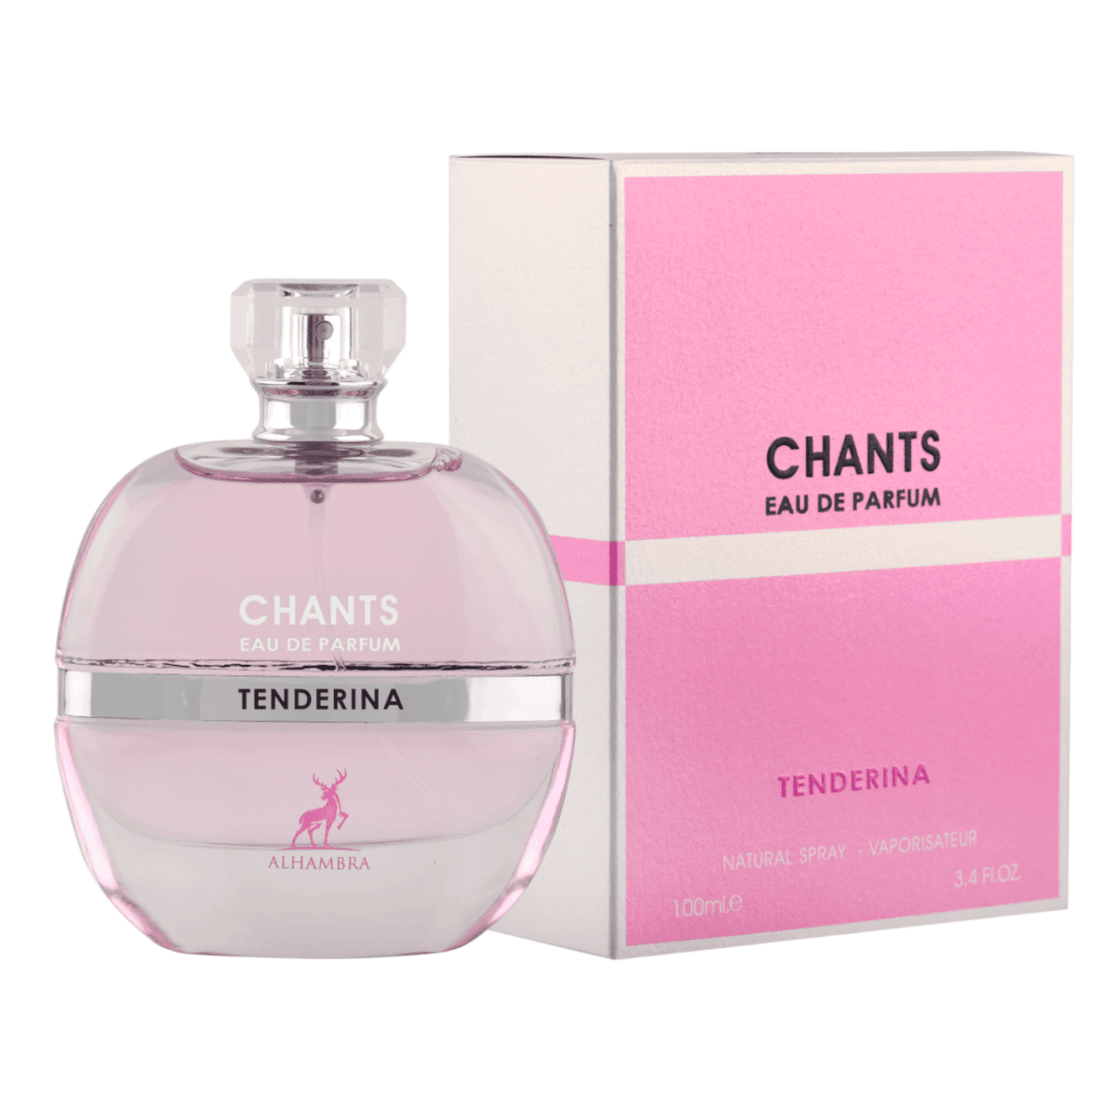 Elegant bottle of Chants Tenderina Perfume by Maison Alhambra, encapsulating its floral-fruity essence and sophistication.